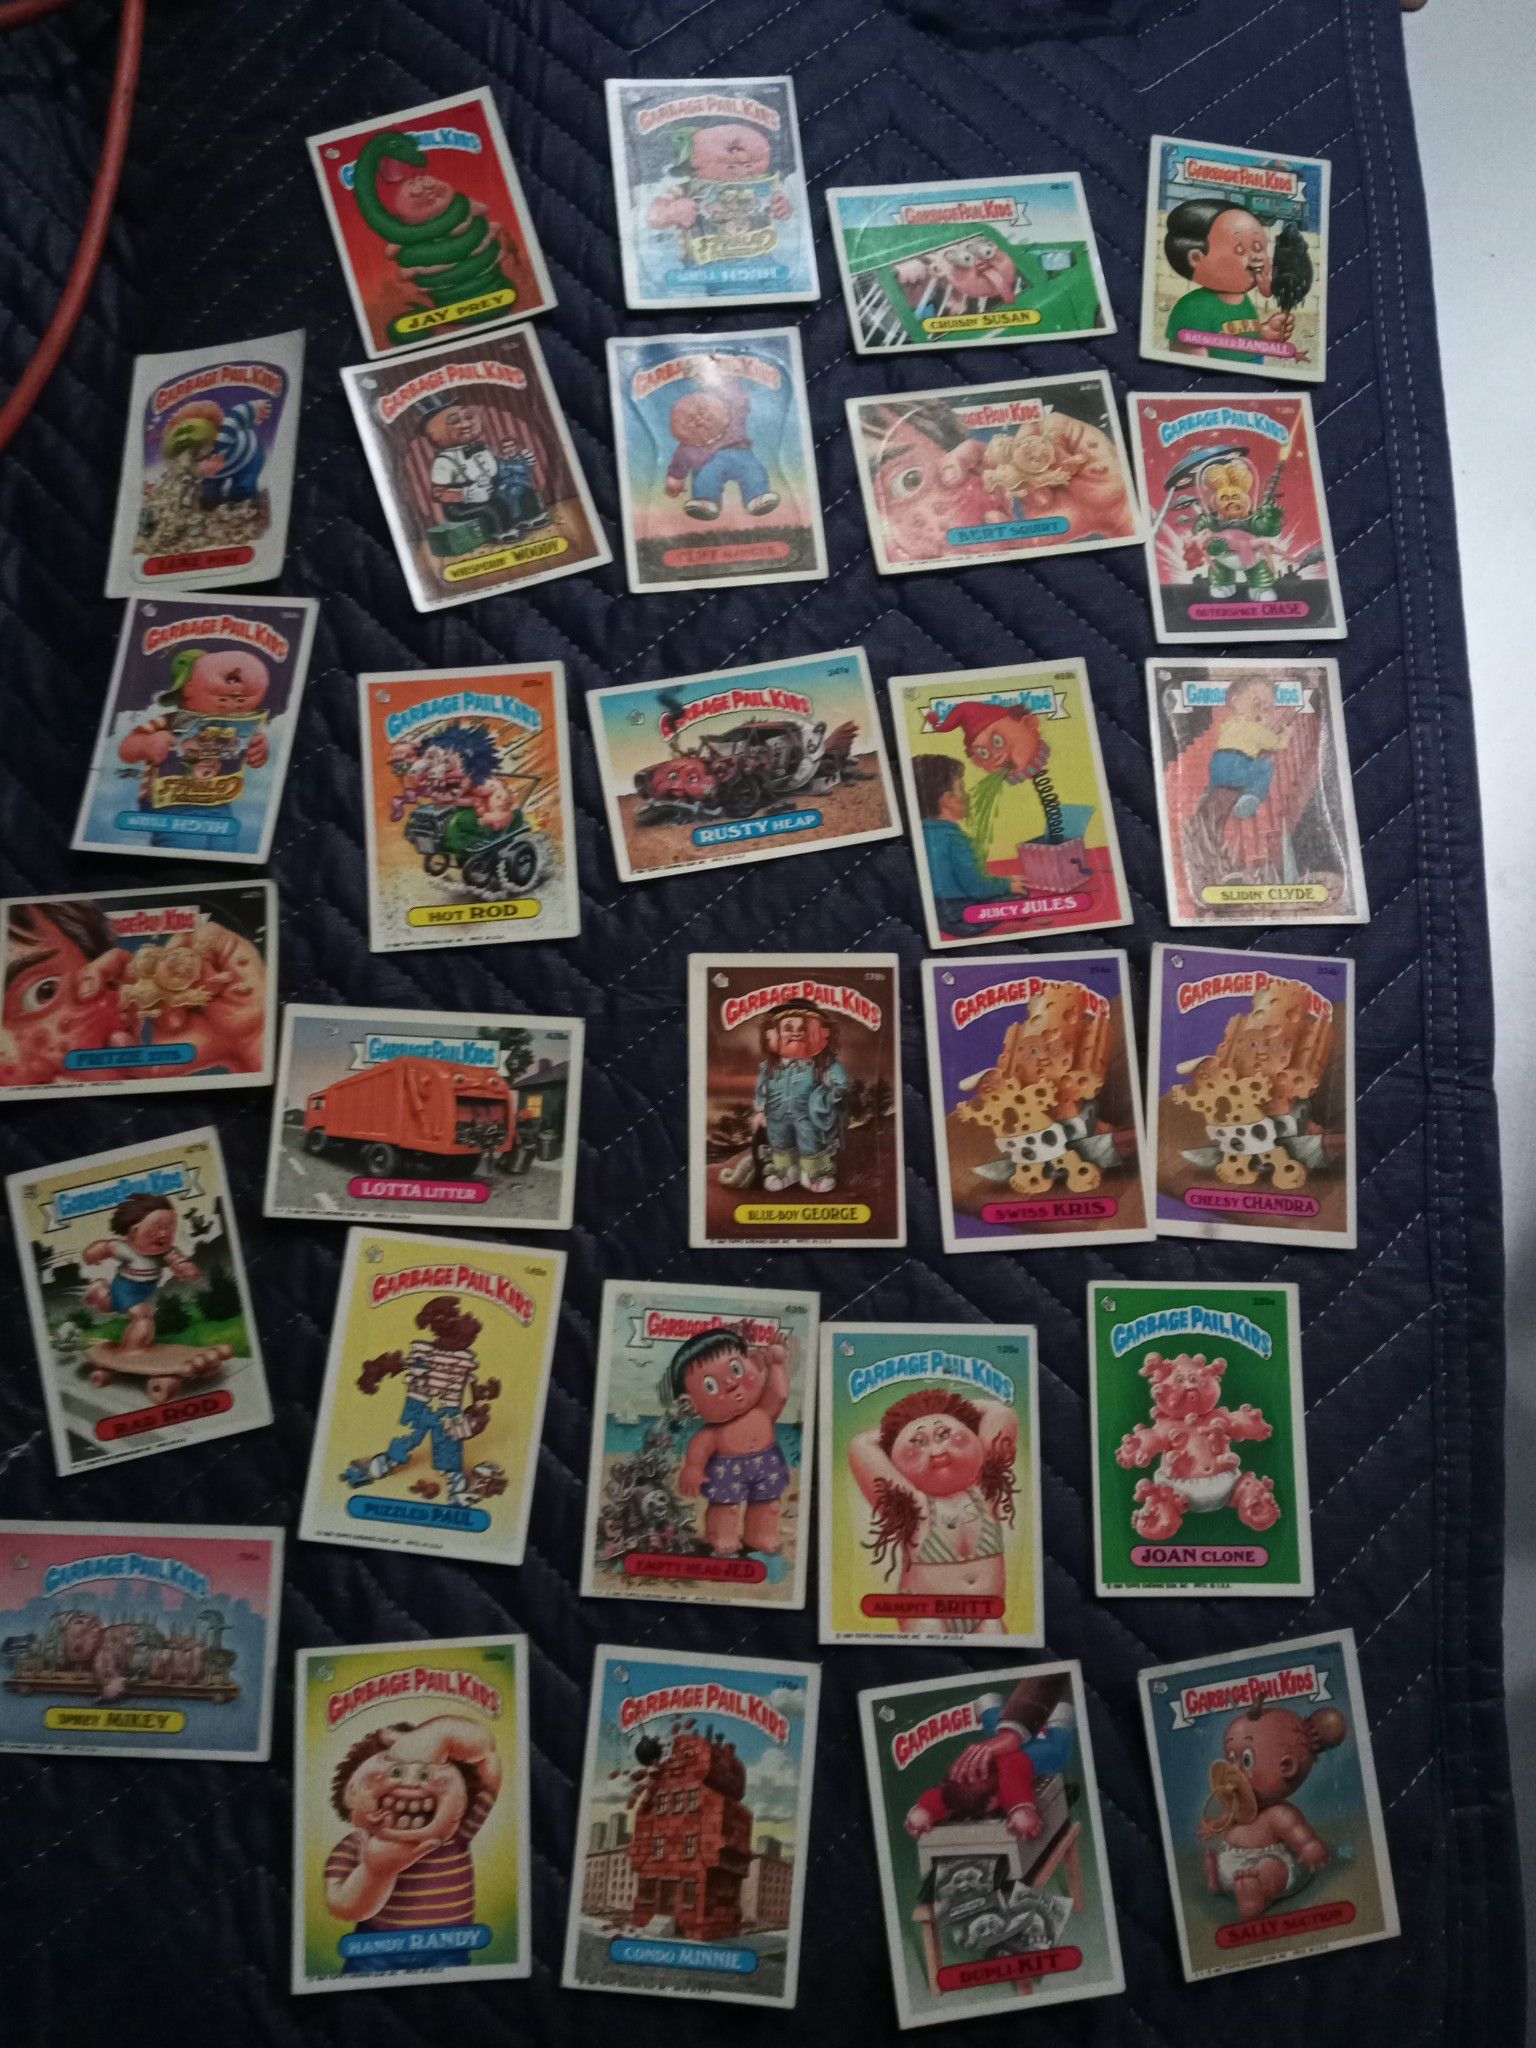 COLLECTABLE GARBAGE PALE KIDS CARDS